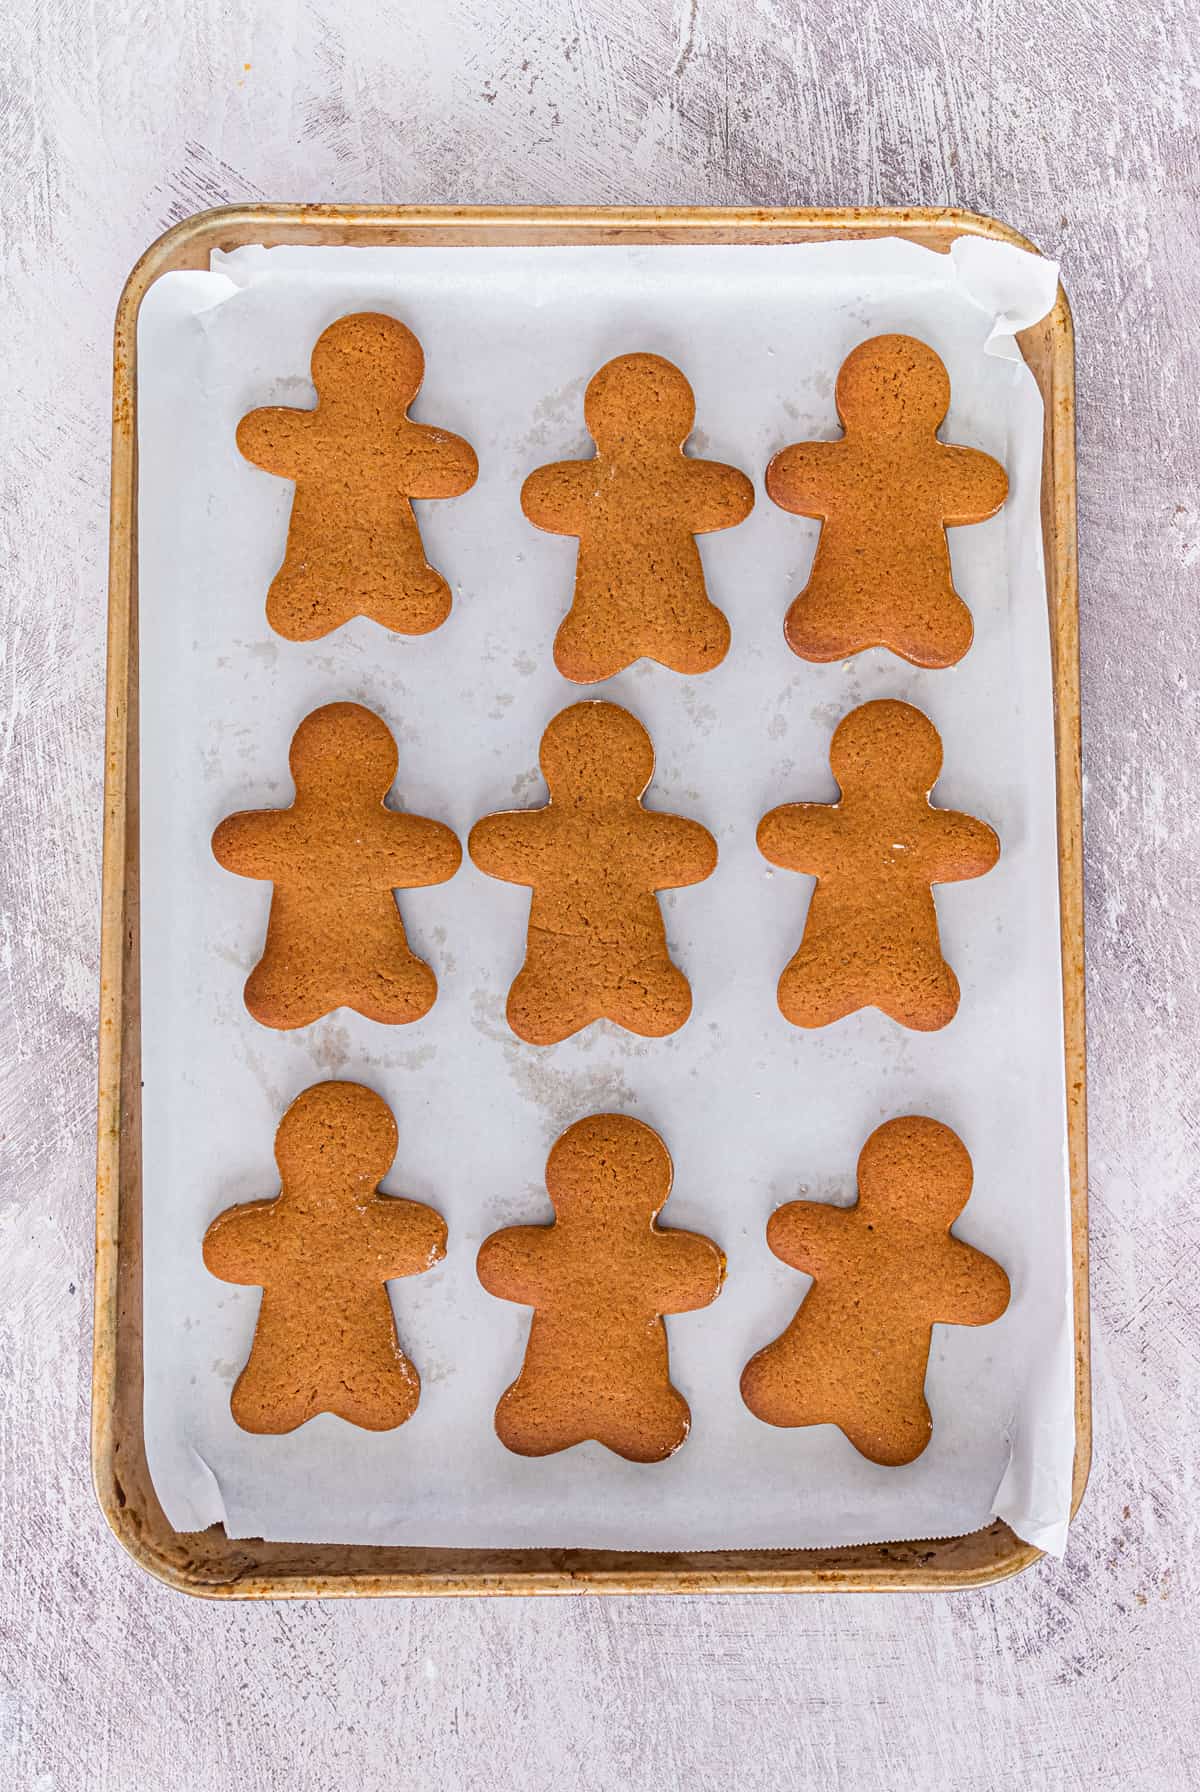 undecorated gingerbread men cookies on parchment-lined baking sheet